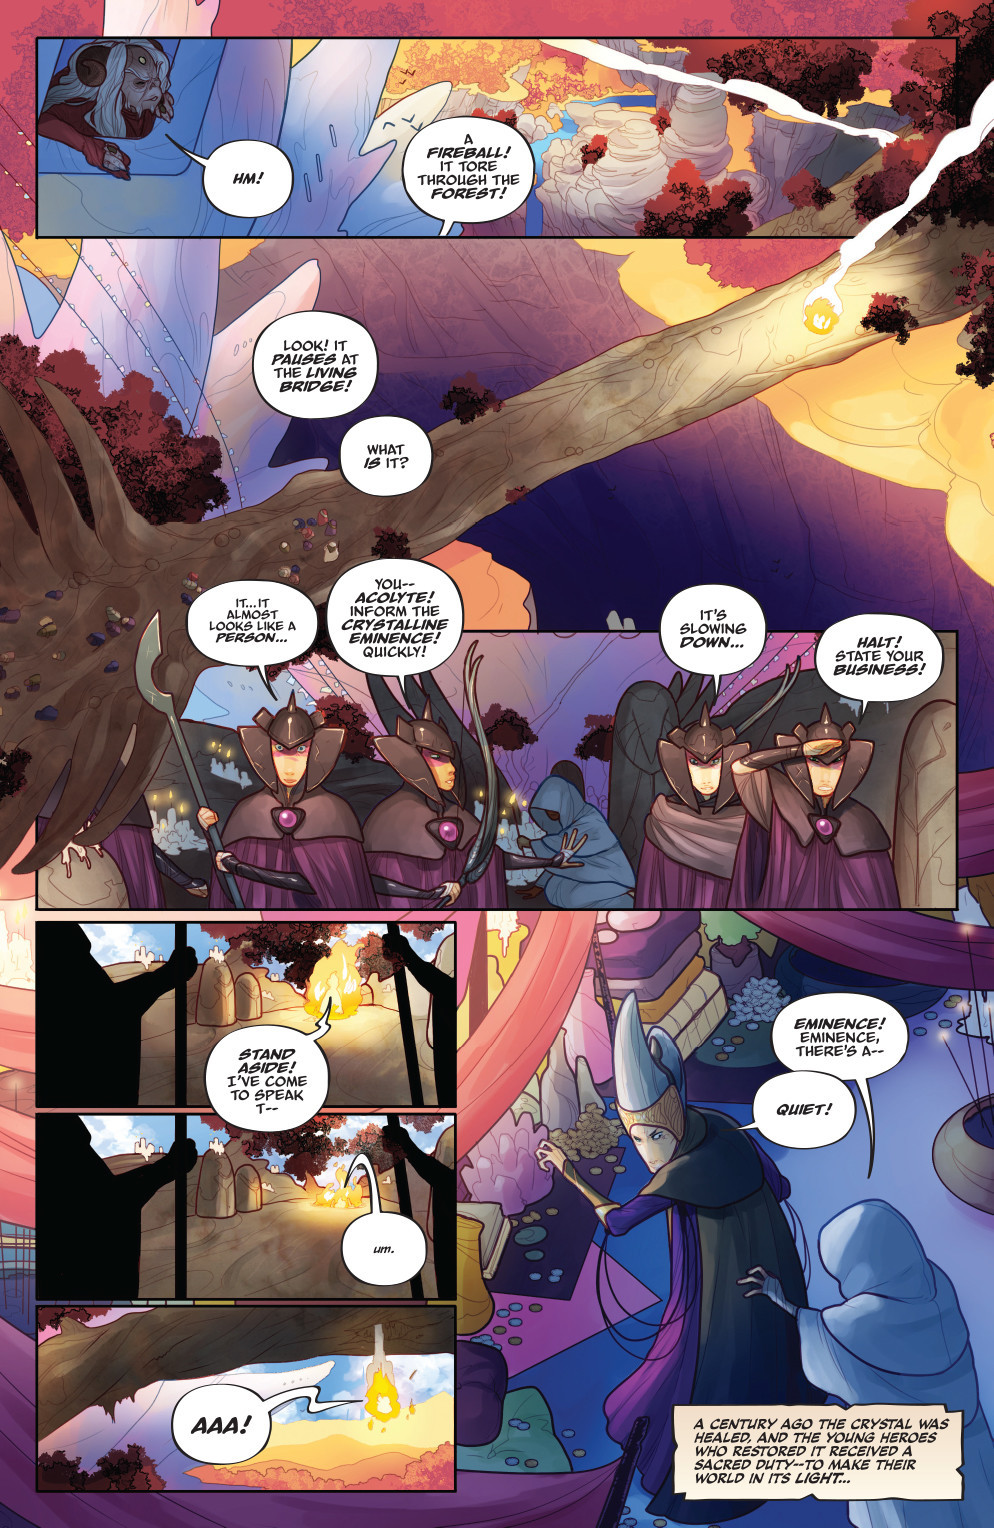 A page from "The Power of the Dark Crystal" No. 1 by Simon Spurrier and Kelly and Nichole Matthews.